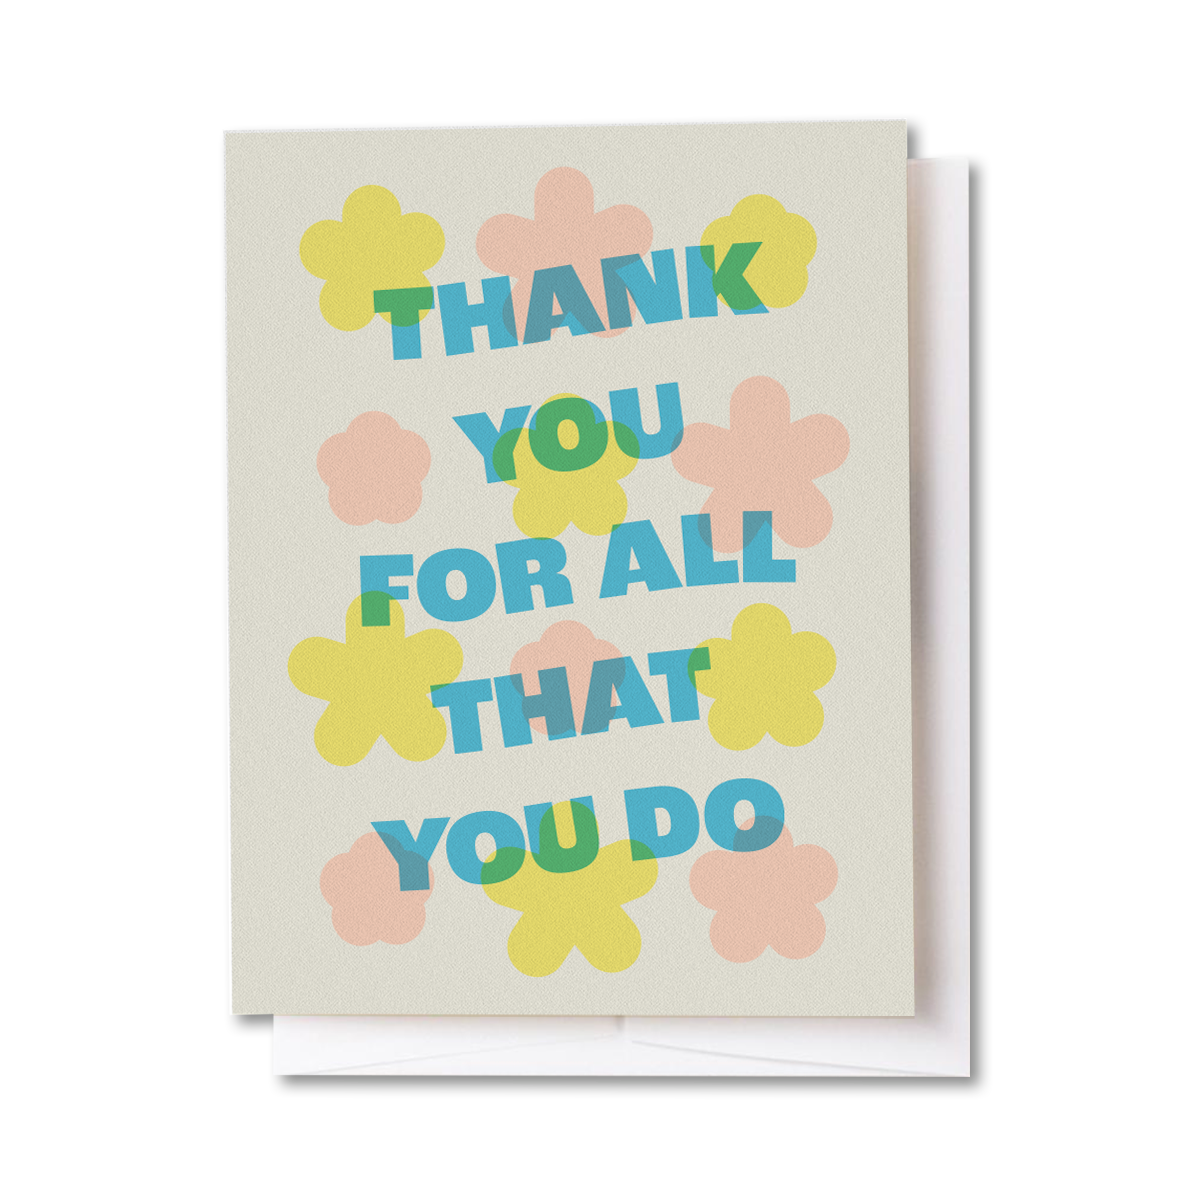 All That You Do Floral Card